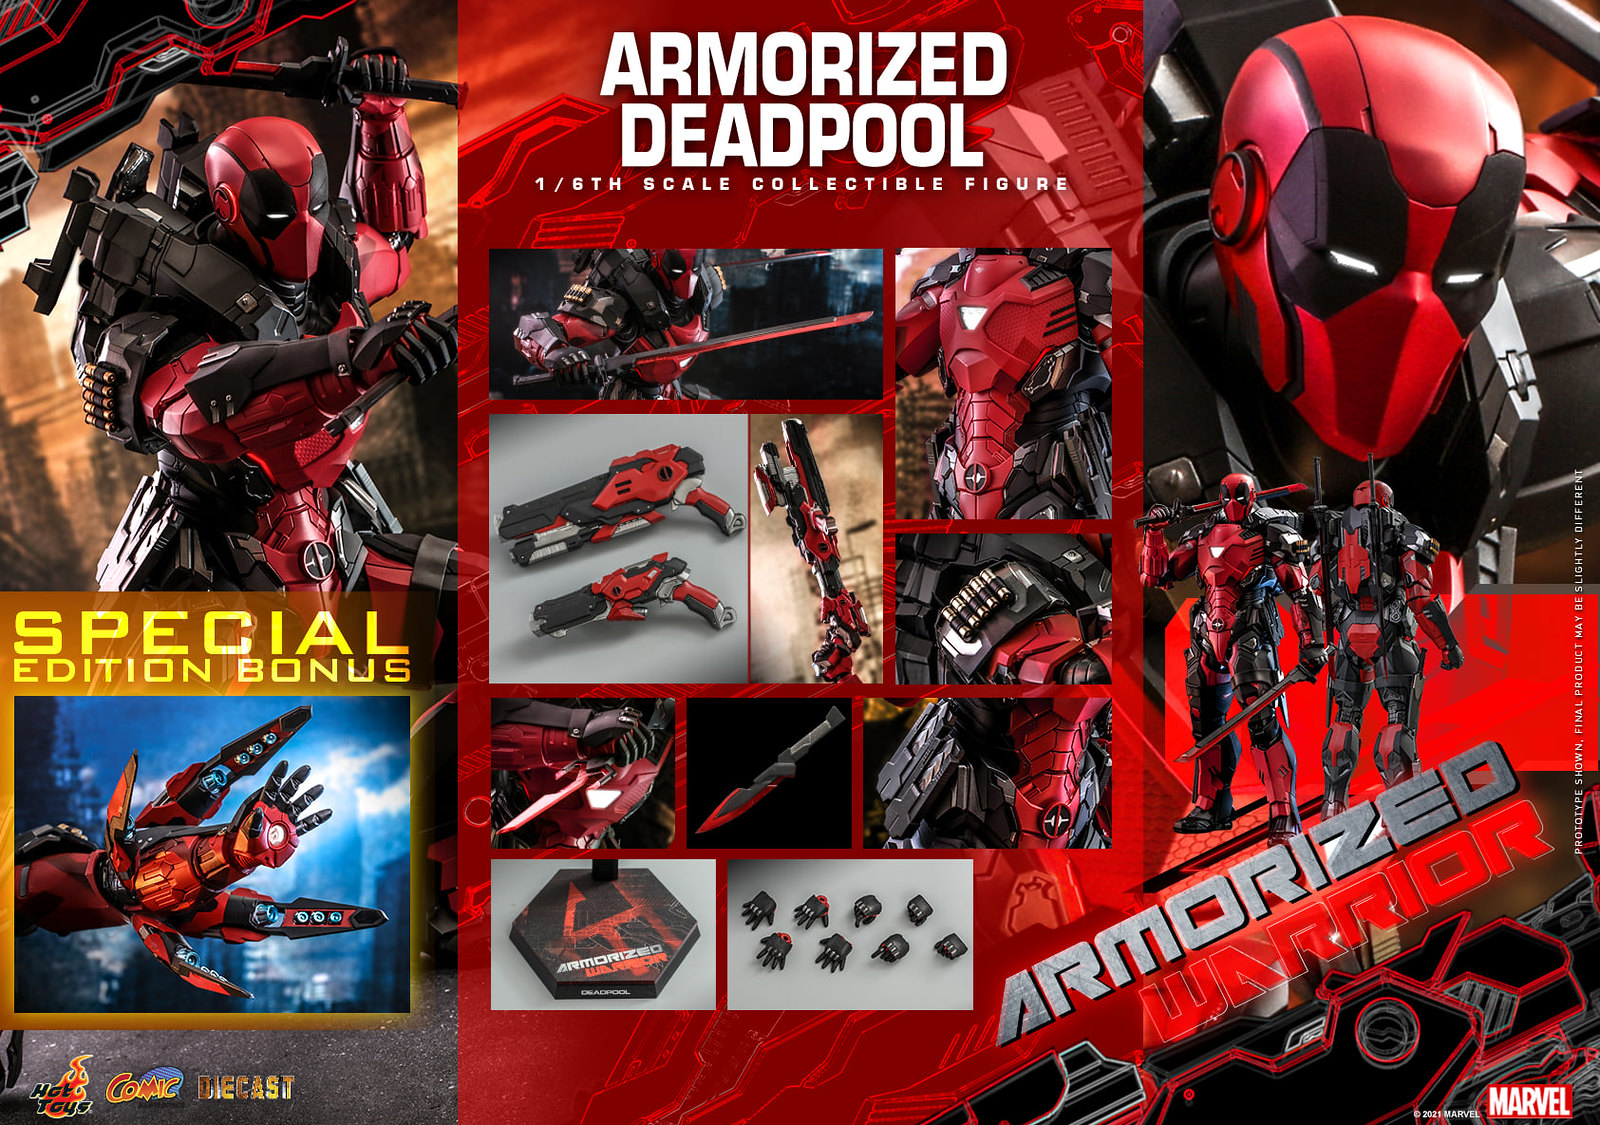 NEW PRODUCT: Hot Toys Armorized Warrior - 1/6th scale Armorized Deadpool Collectible Figure [Armorized Warrior Collection] 51310495997_8b33928d12_h